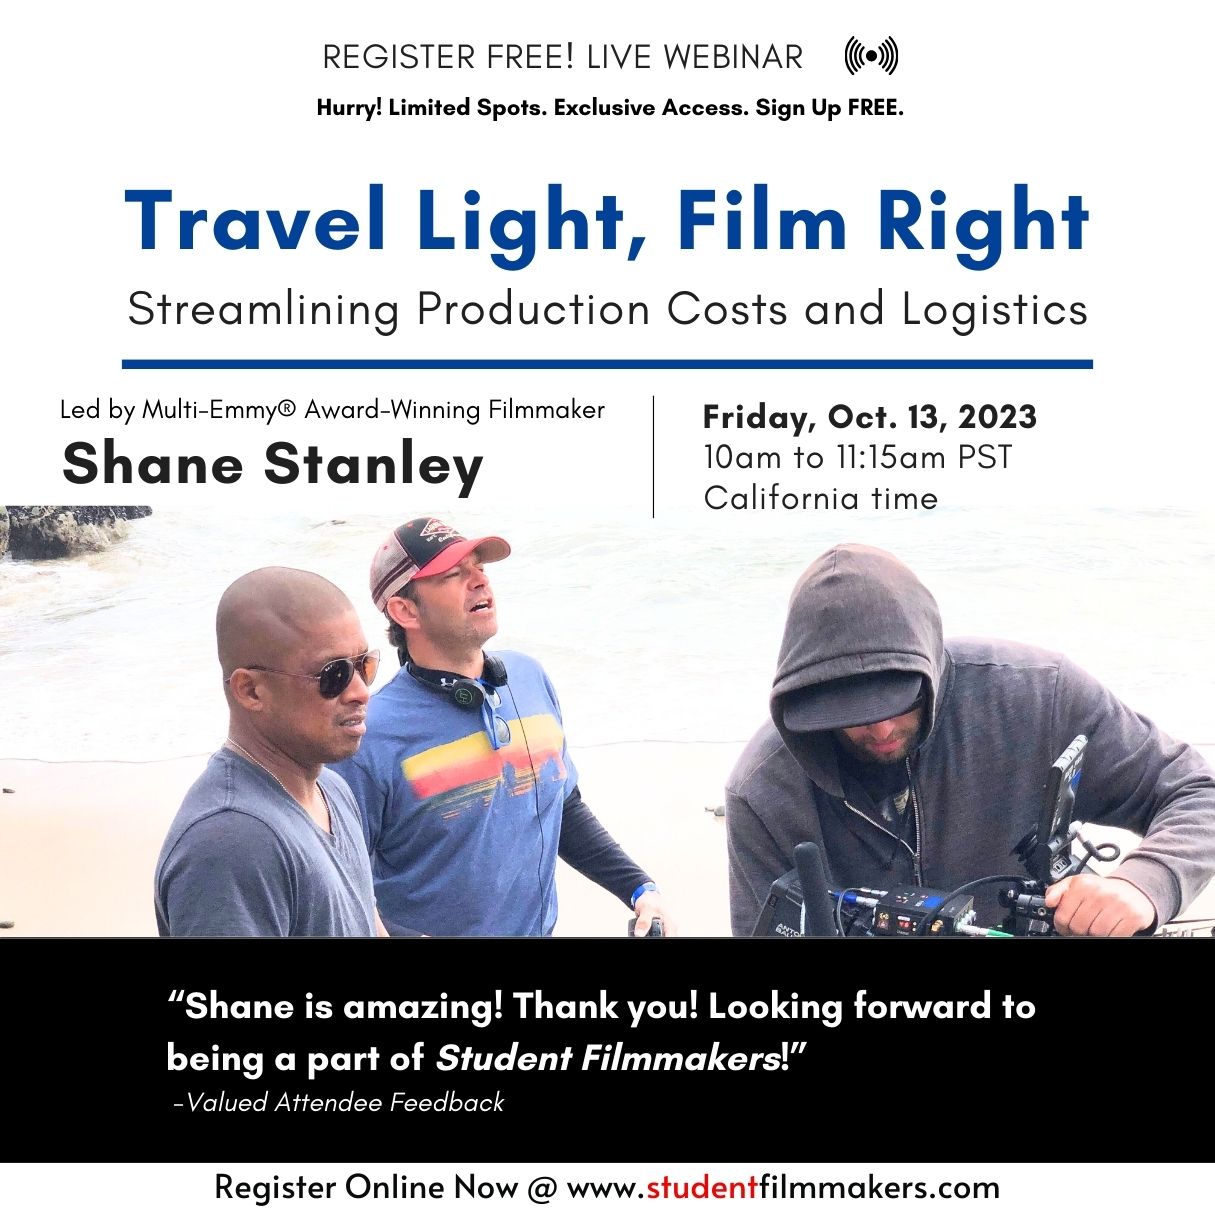 Live Webinar: "Travel Light, Film Right: Streamlining Production Costs and Logistics" with Shane Stanley